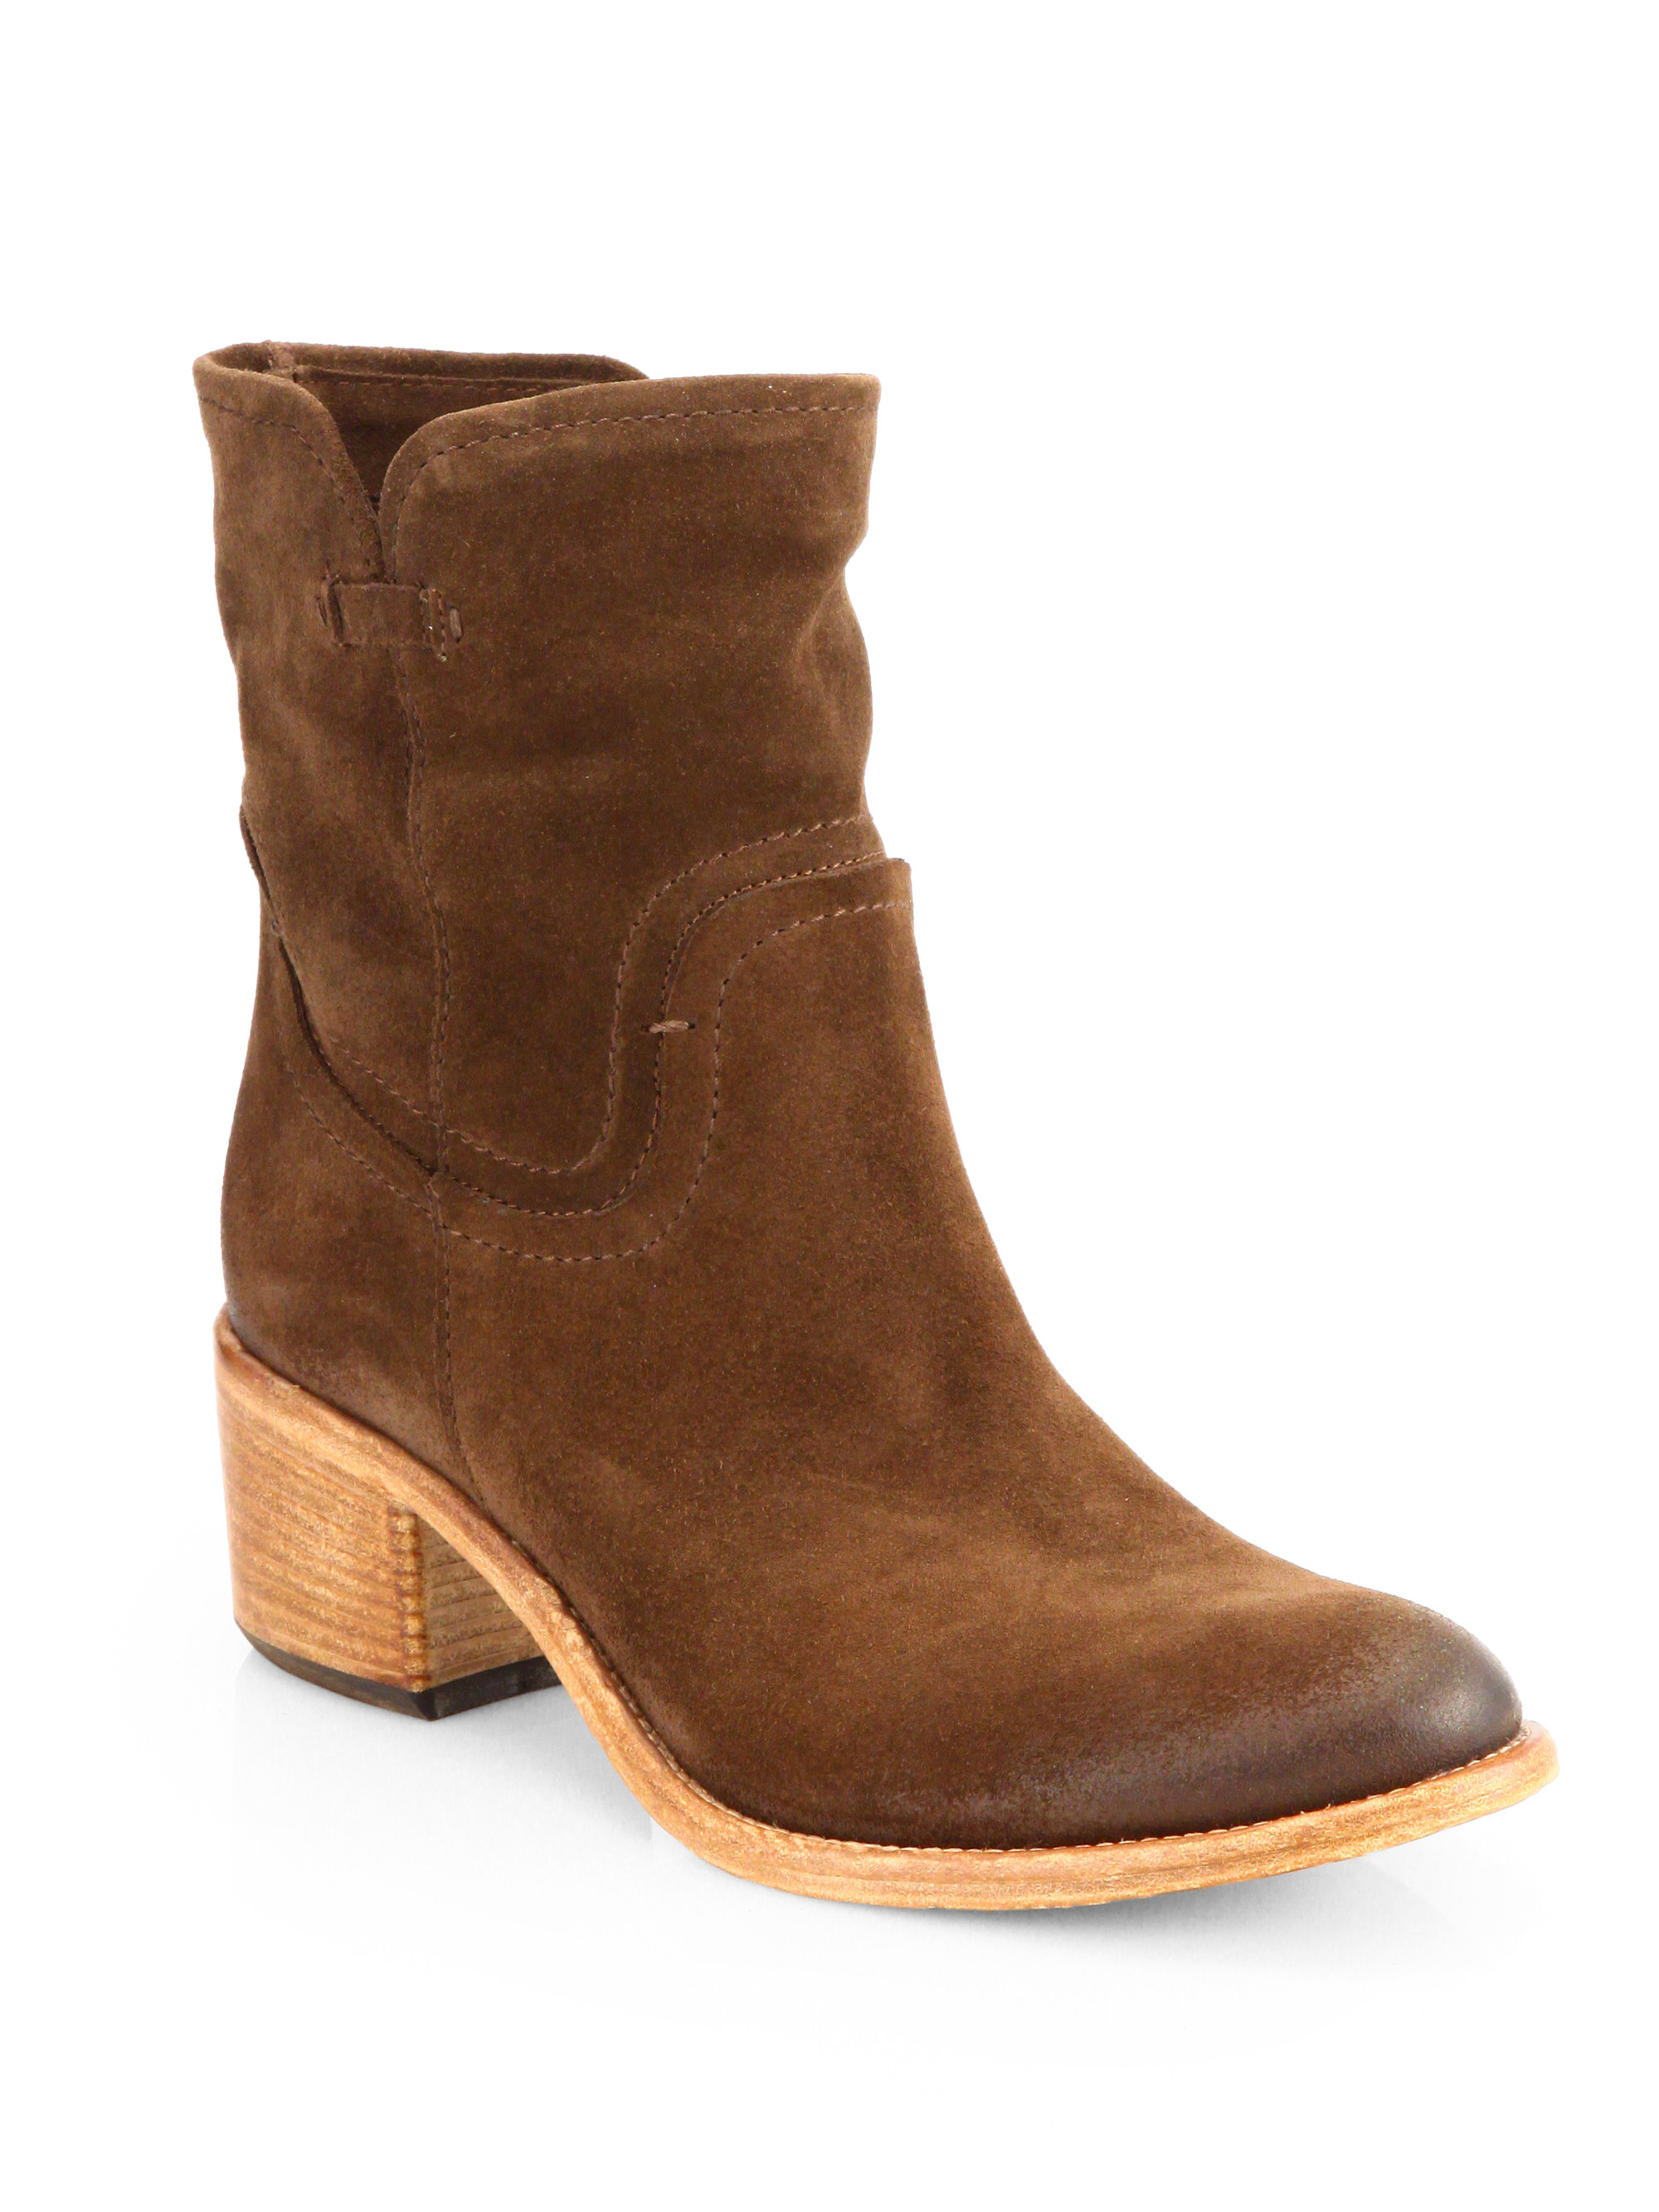 Alberto Fermani Stephania Suede Ankle Boots in Brown (MARRONE) | Lyst